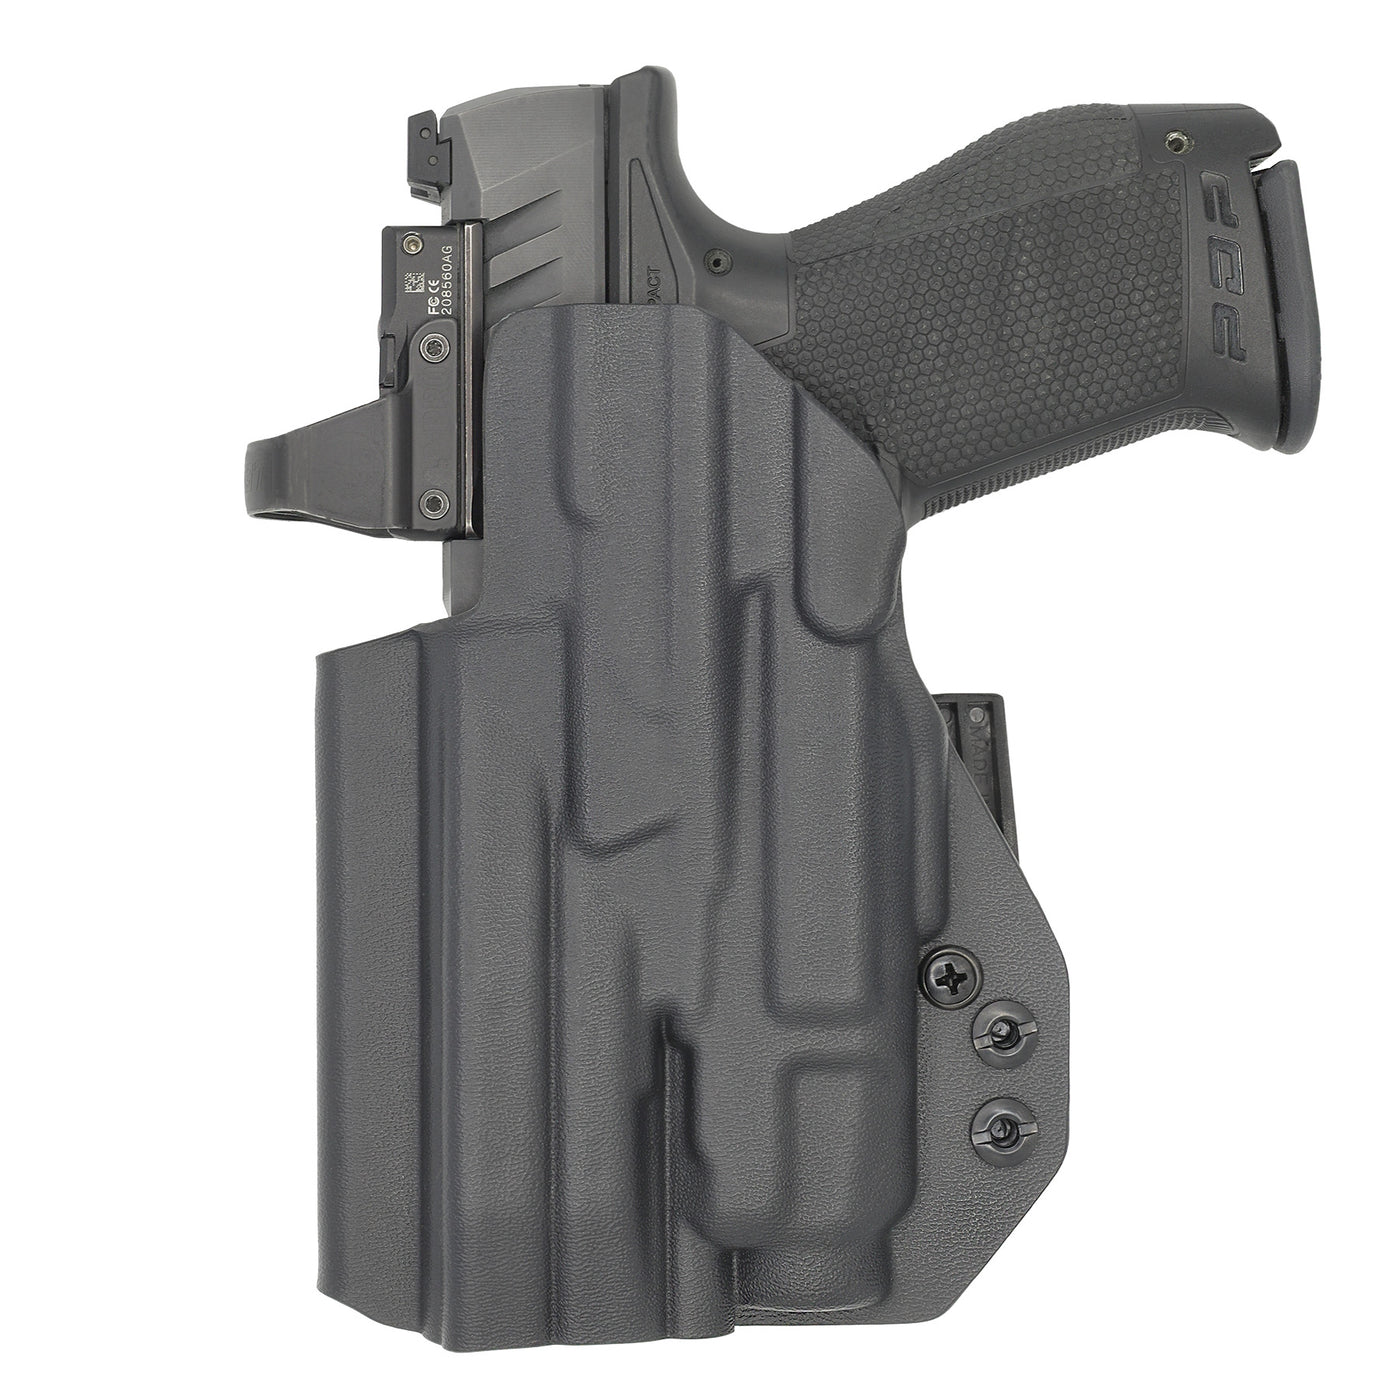 C&G Holsters quickship IWB ALPHA UPGRADE Tactical FN 509/T Streamlight TLR7/a in holstered position back view